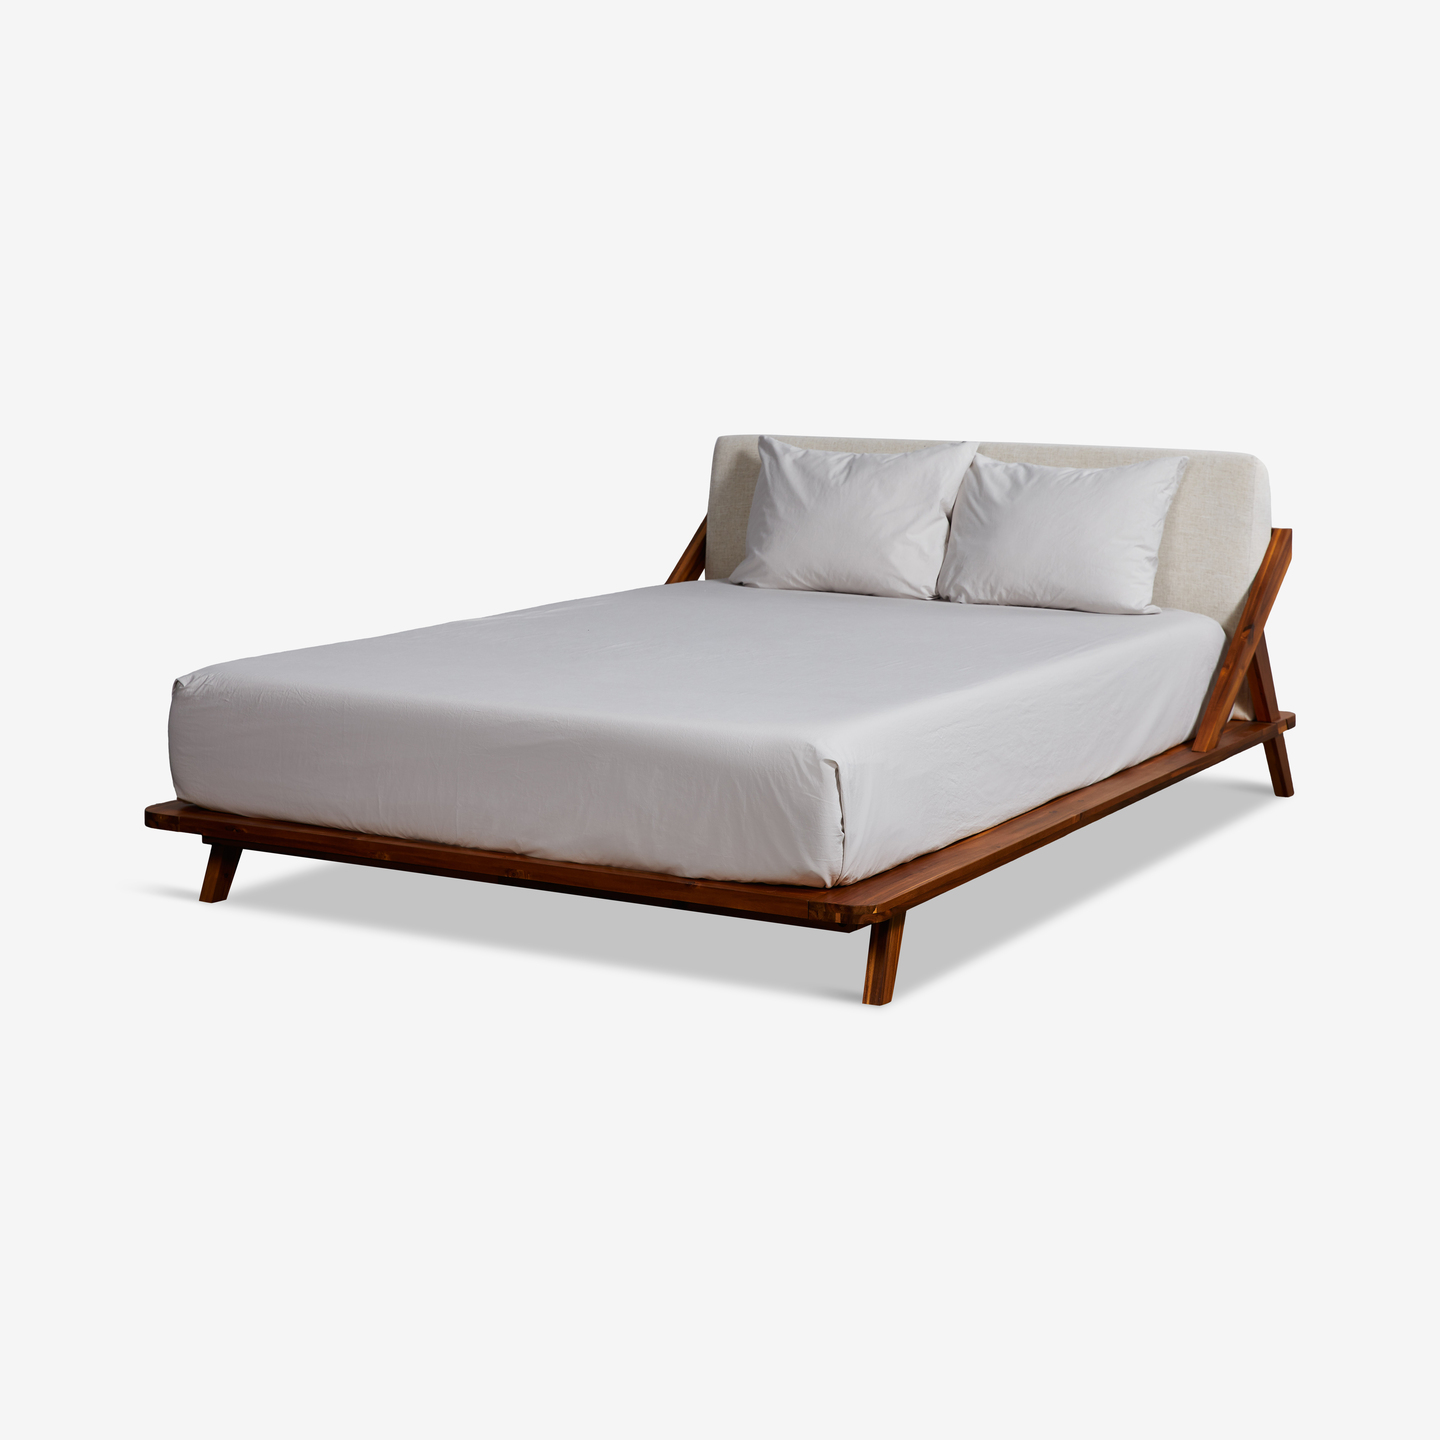 Drommen Acacia Wood Bed, Ivory, King